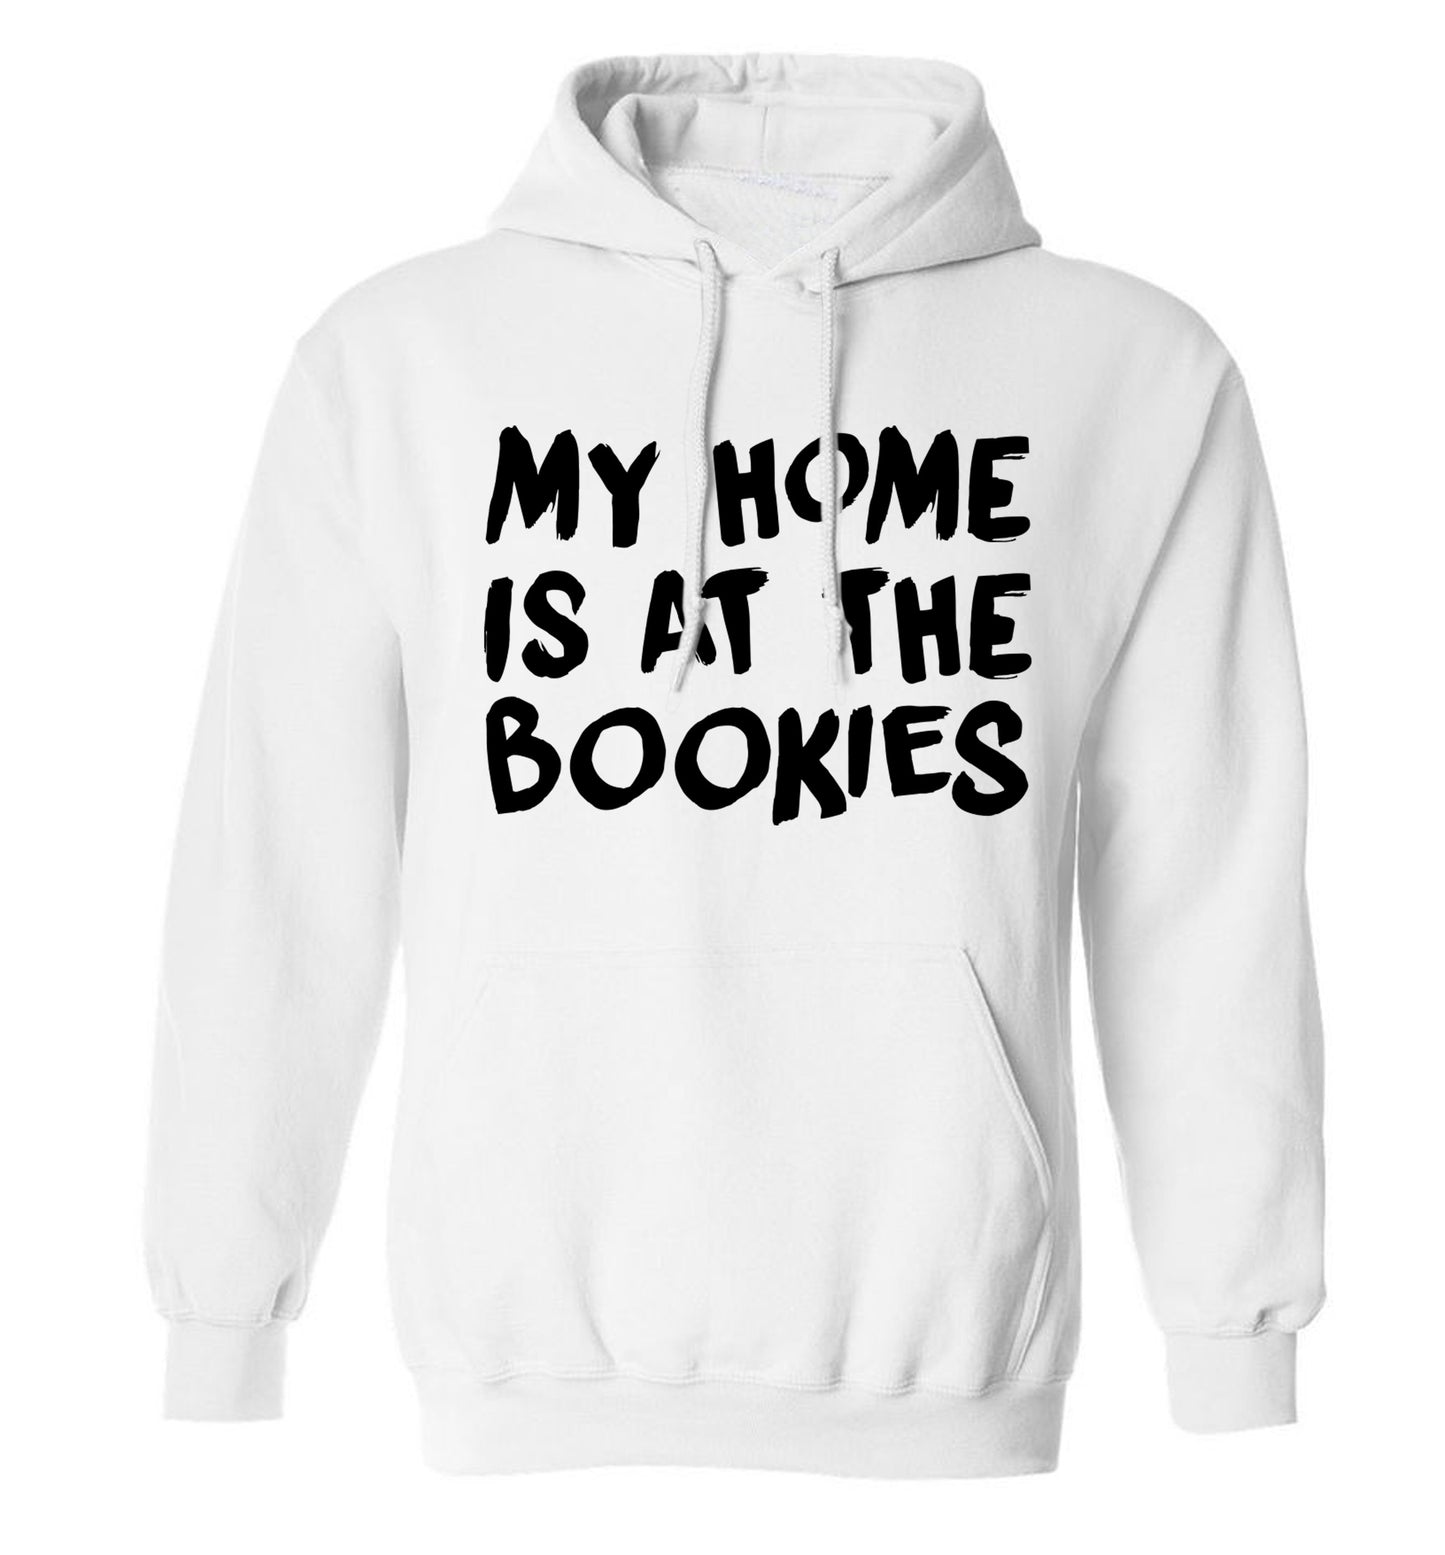 My home is at the bookies adults unisex white hoodie 2XL